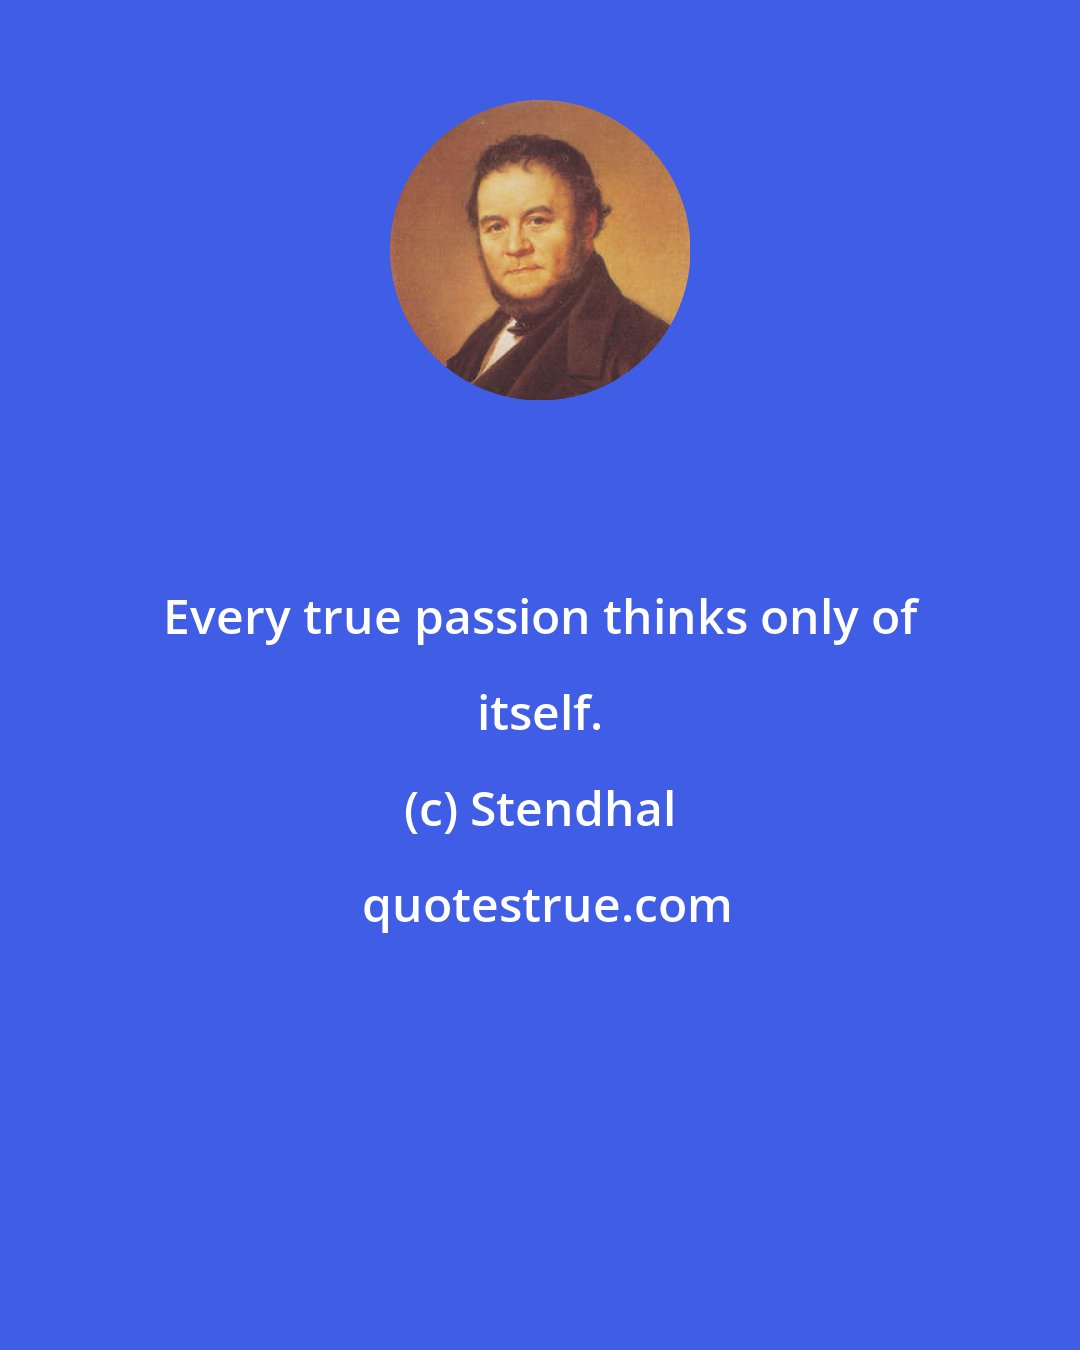 Stendhal: Every true passion thinks only of itself.